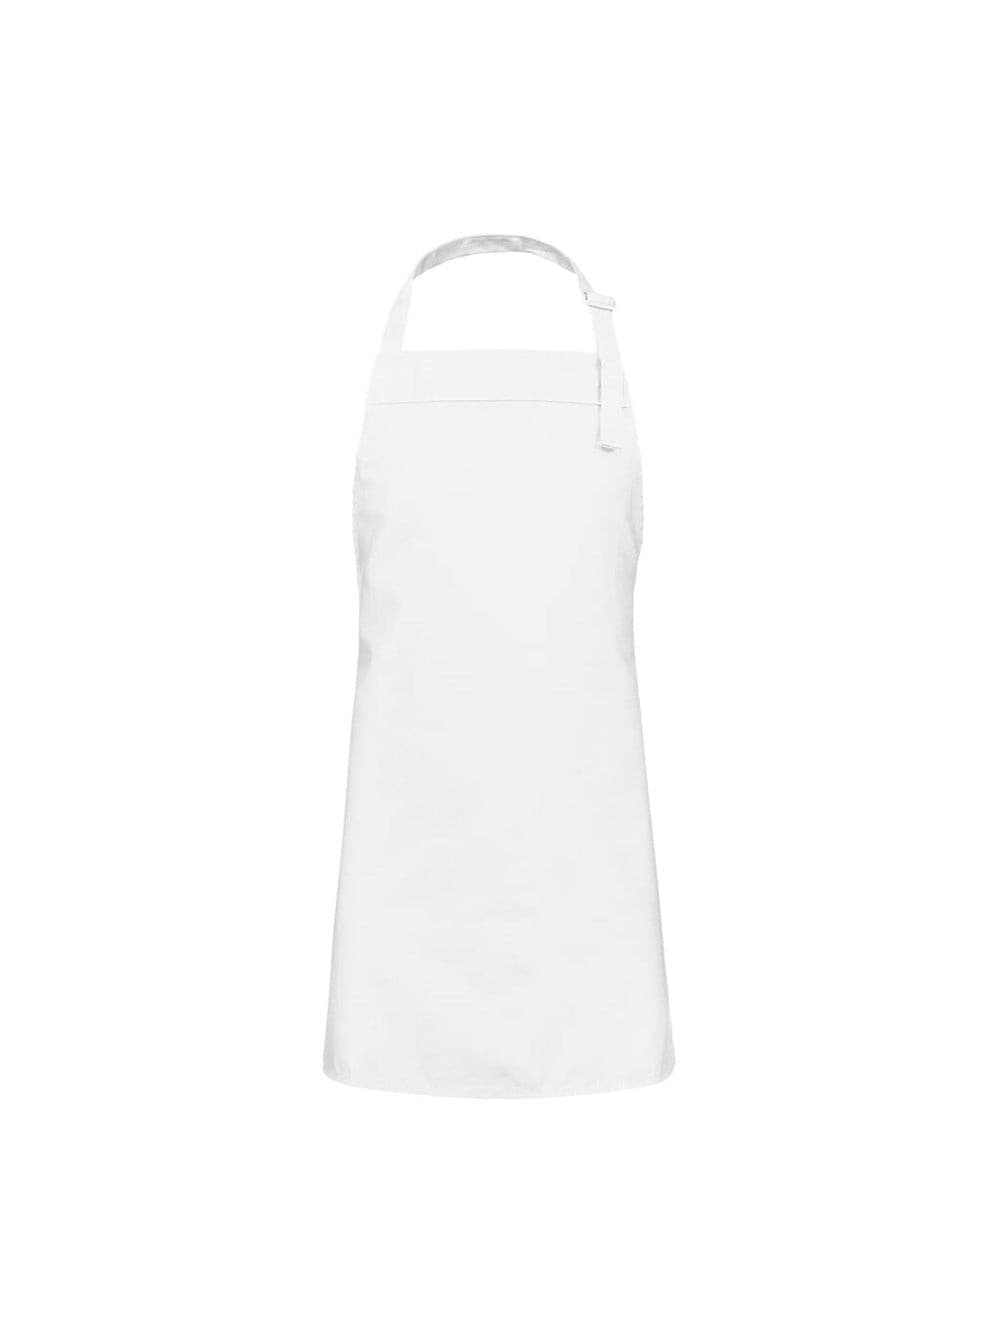 Bib Apron Kids White by The Little Chef Collection -  ChefsCotton